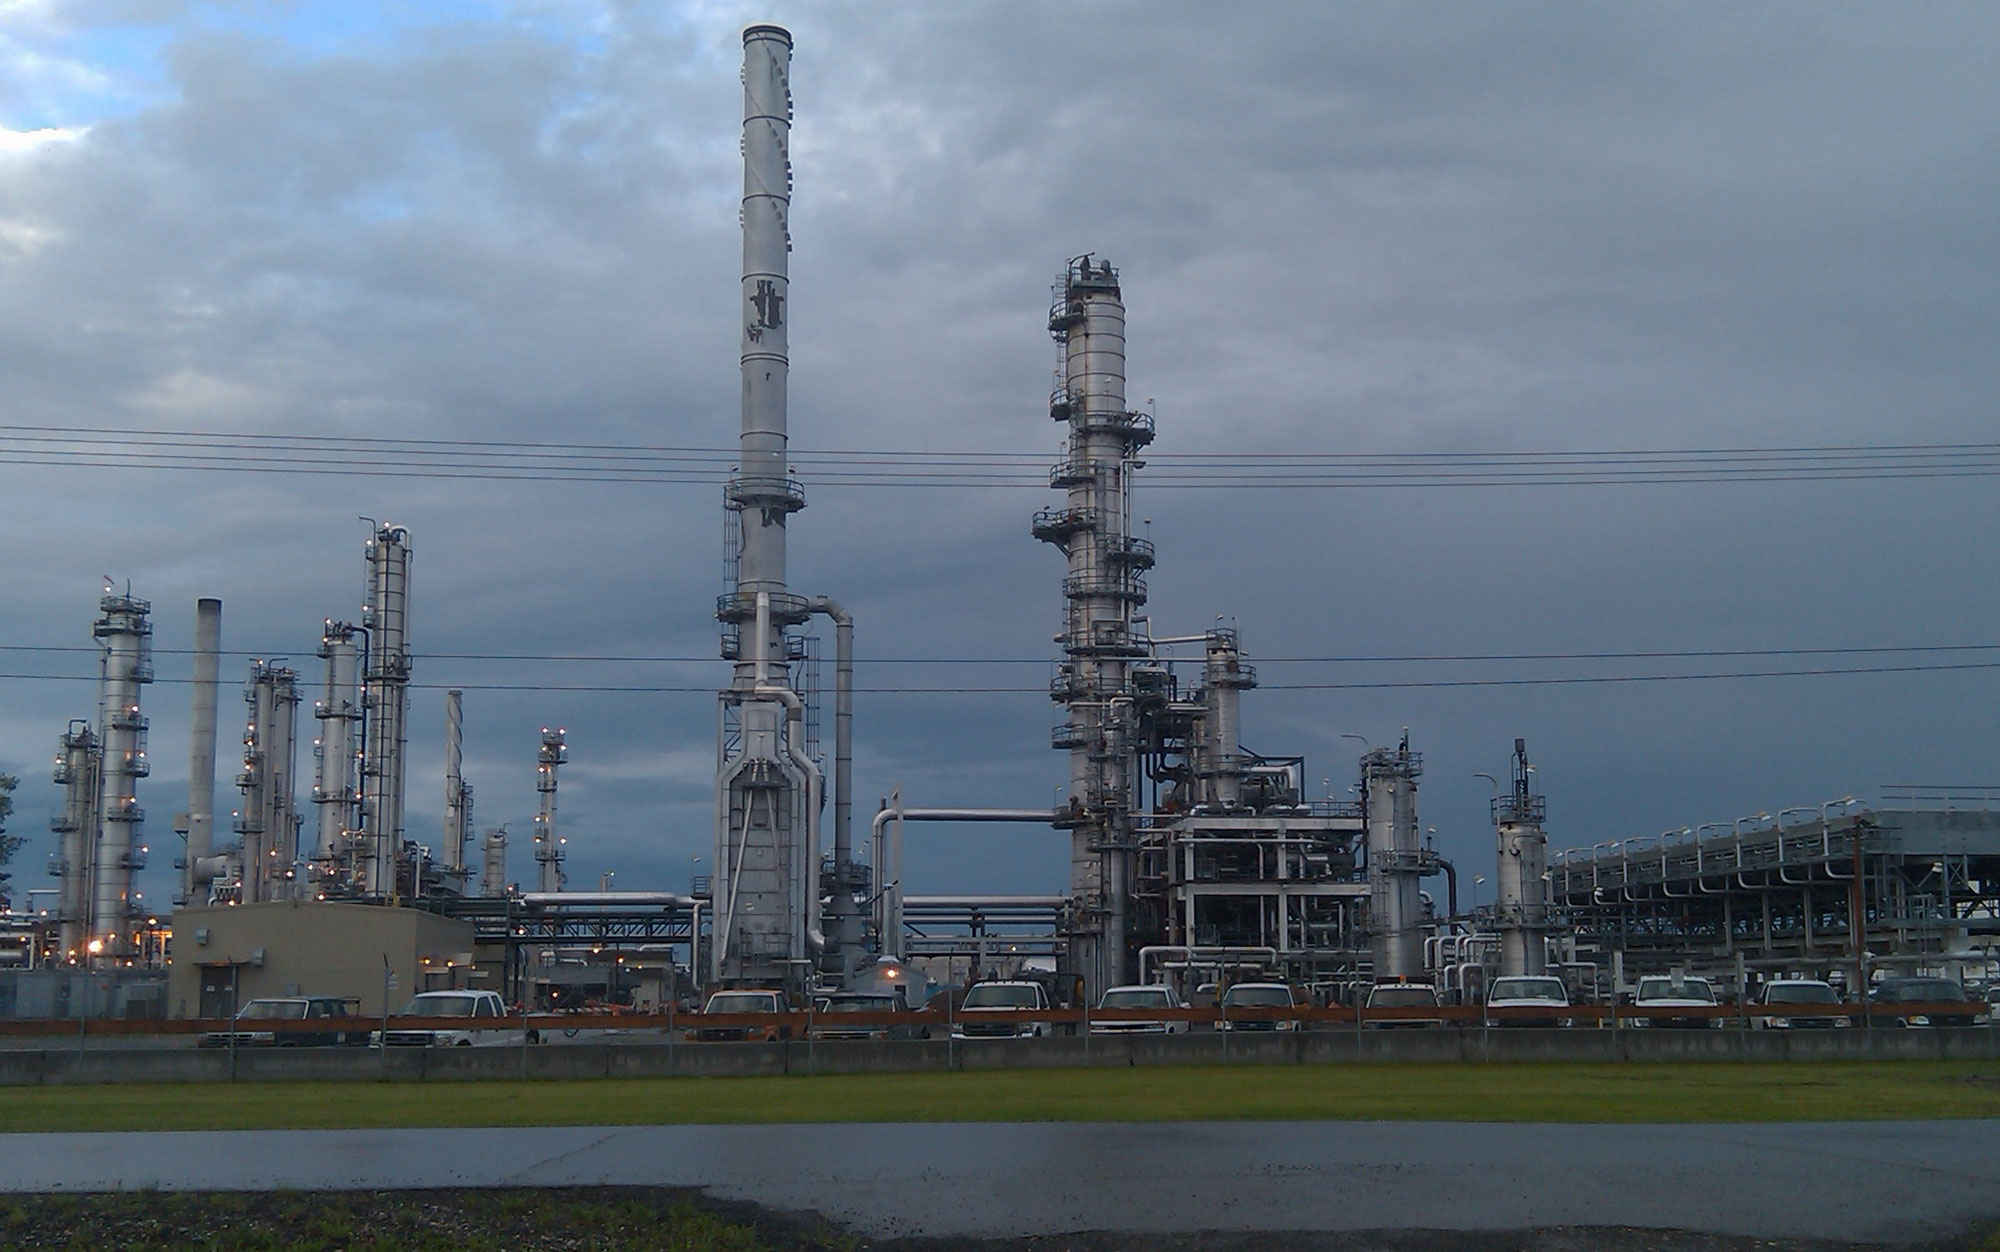 Photograph of an oil refinery near Fairbanks, Alaska. The photo shows structures of the refinery with trucks parked in a parking lot in the foreground. This refinery was closed in 2014.